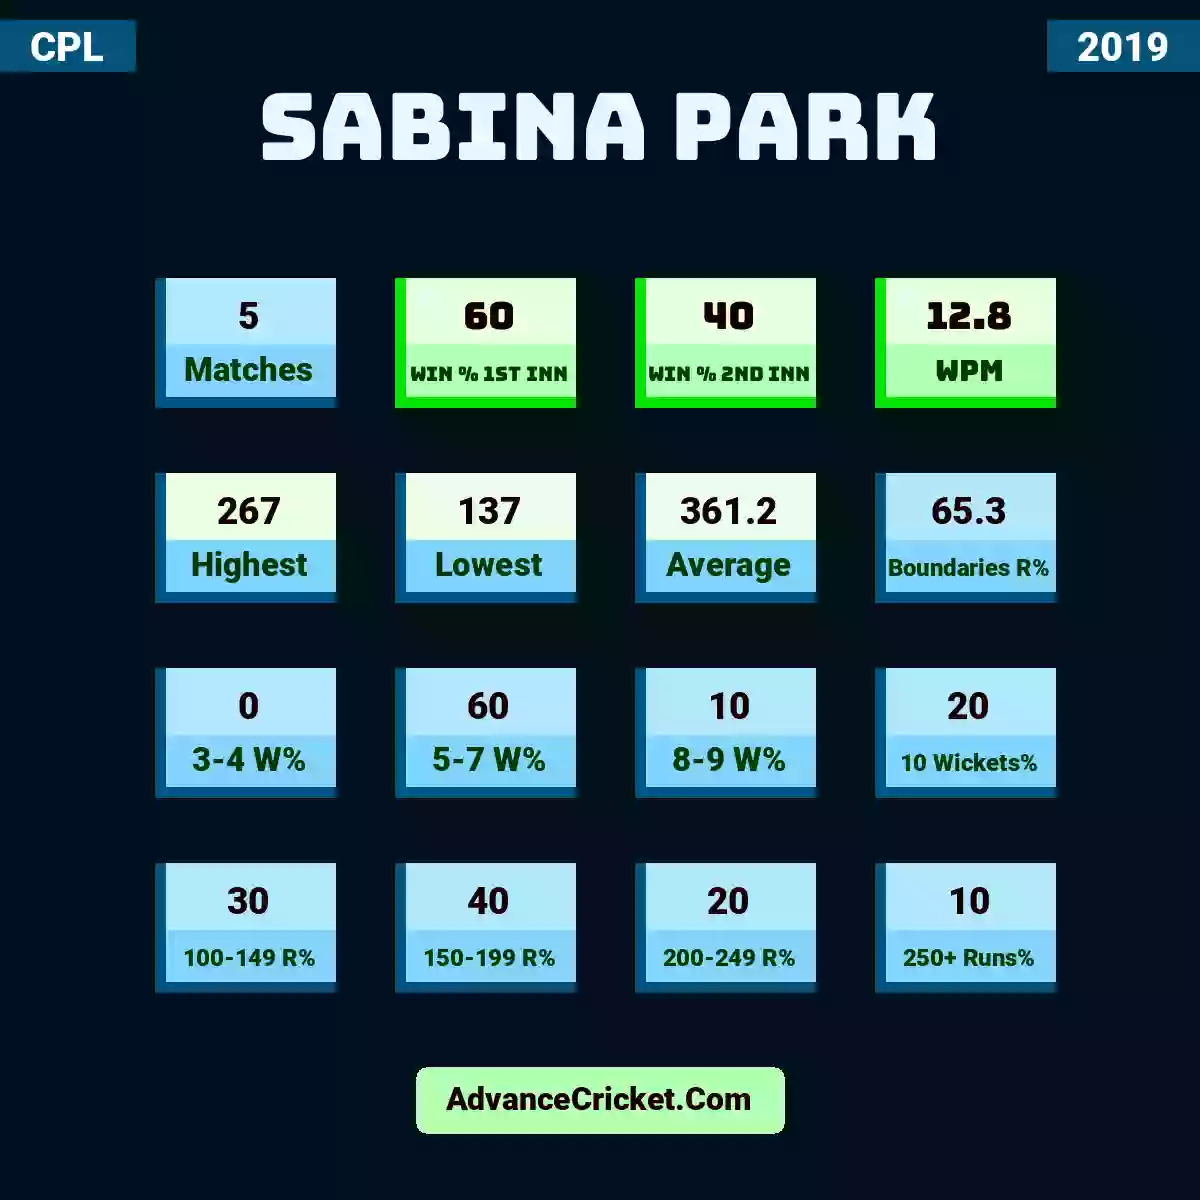 Image showing Sabina Park with Matches: 5, Win % 1st Inn: 60, Win % 2nd Inn: 40, WPM: 12.8, Highest: 267, Lowest: 137, Average: 361.2, Boundaries R%: 65.3, 3-4 W%: 0, 5-7 W%: 60, 8-9 W%: 10, 10 Wickets%: 20, 100-149 R%: 30, 150-199 R%: 40, 200-249 R%: 20, 250+ Runs%: 10.